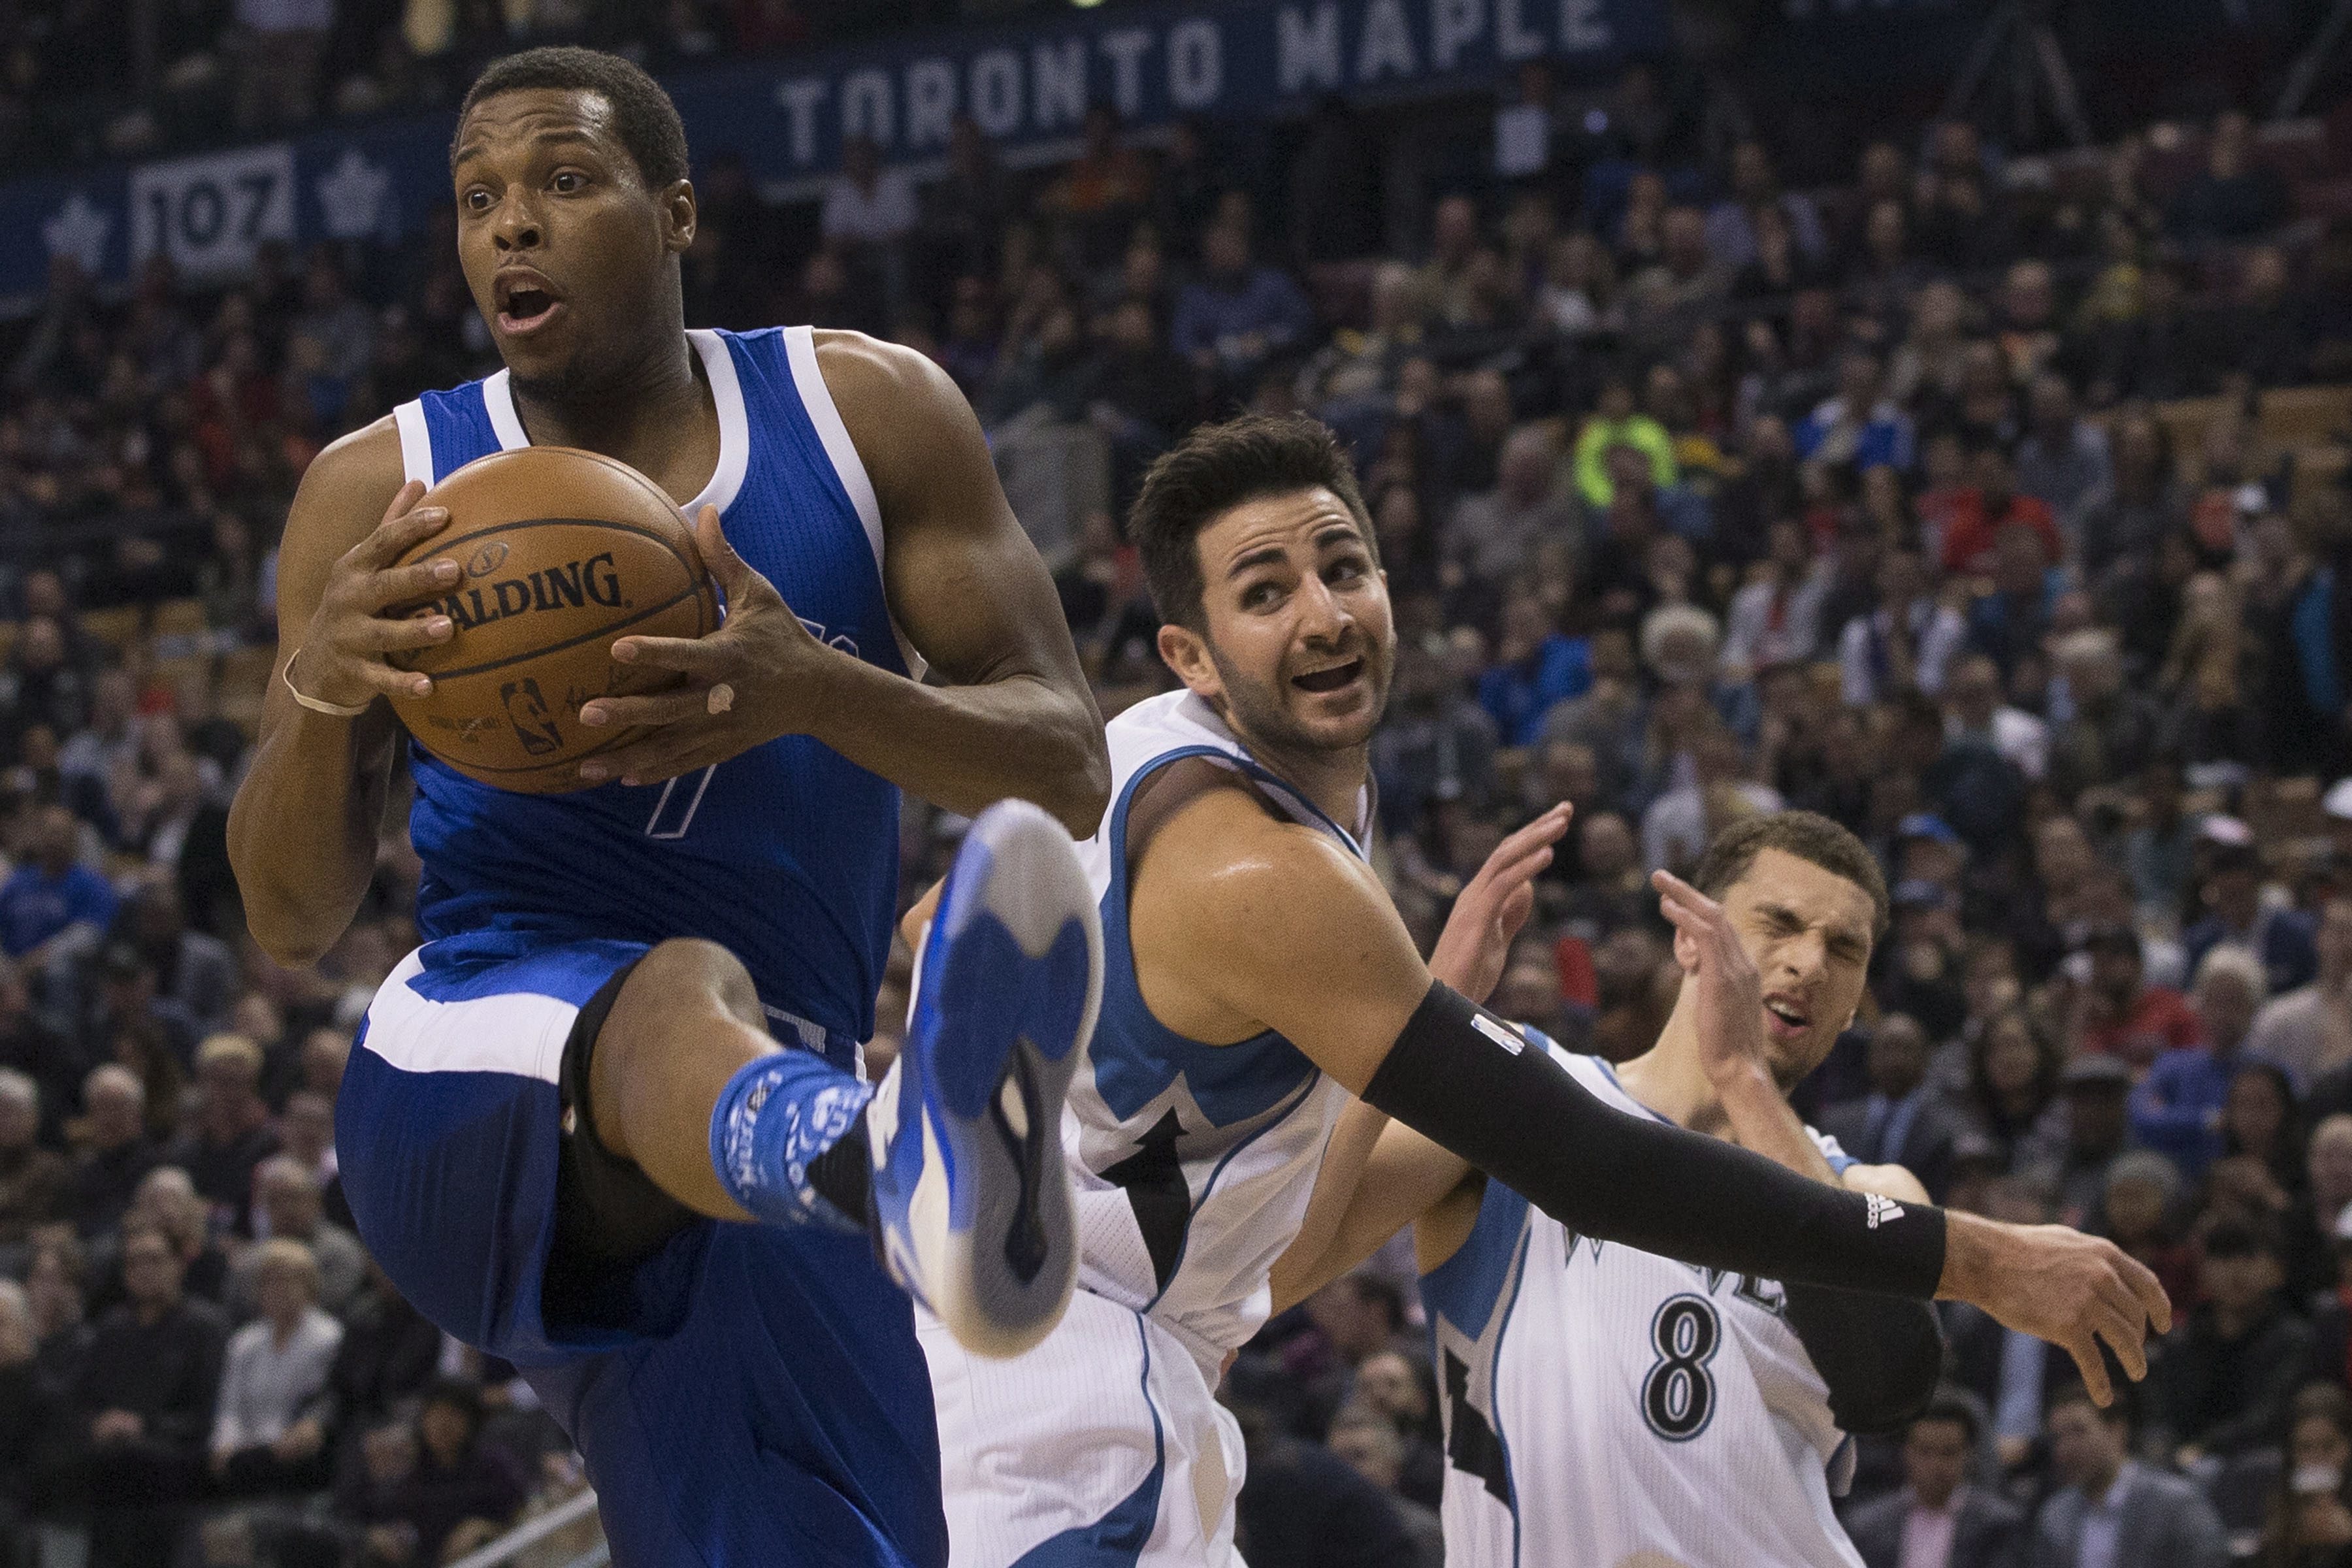 Toronto Raptors guard Kyle Lowry, from left, collects a rebound in front of Minnesota Timberwolves Ricky Rubio and Zach LaVine during the first half of an NBA basketball game in Toronto on Thursday, Dec. 8, 2016. AP